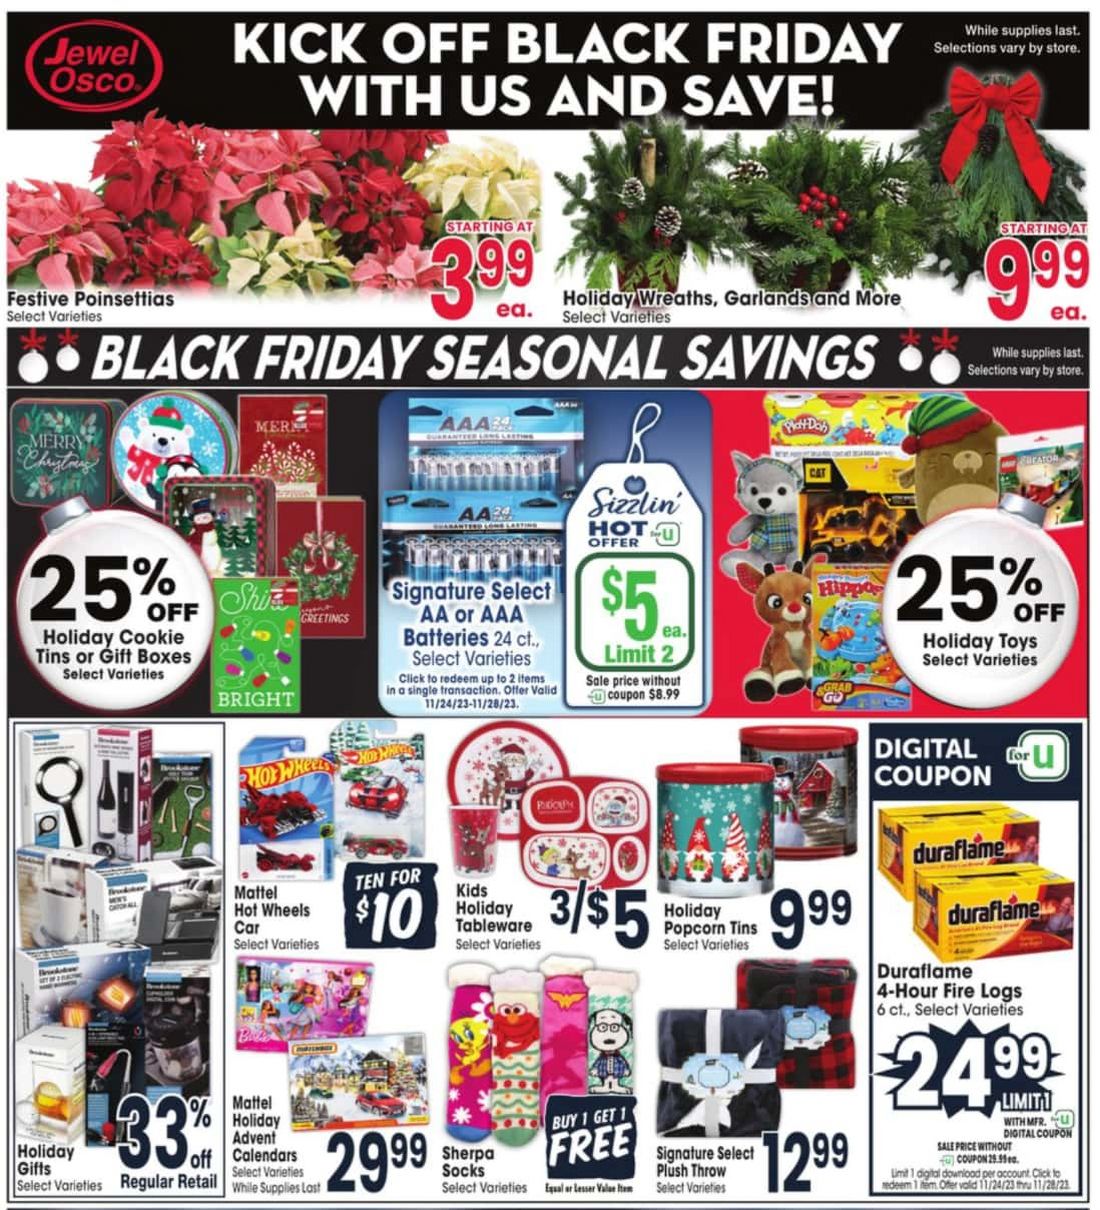 Jewel Osco Black Friday July 2024 Weekly Sales, Deals, Discounts and Digital Coupons.